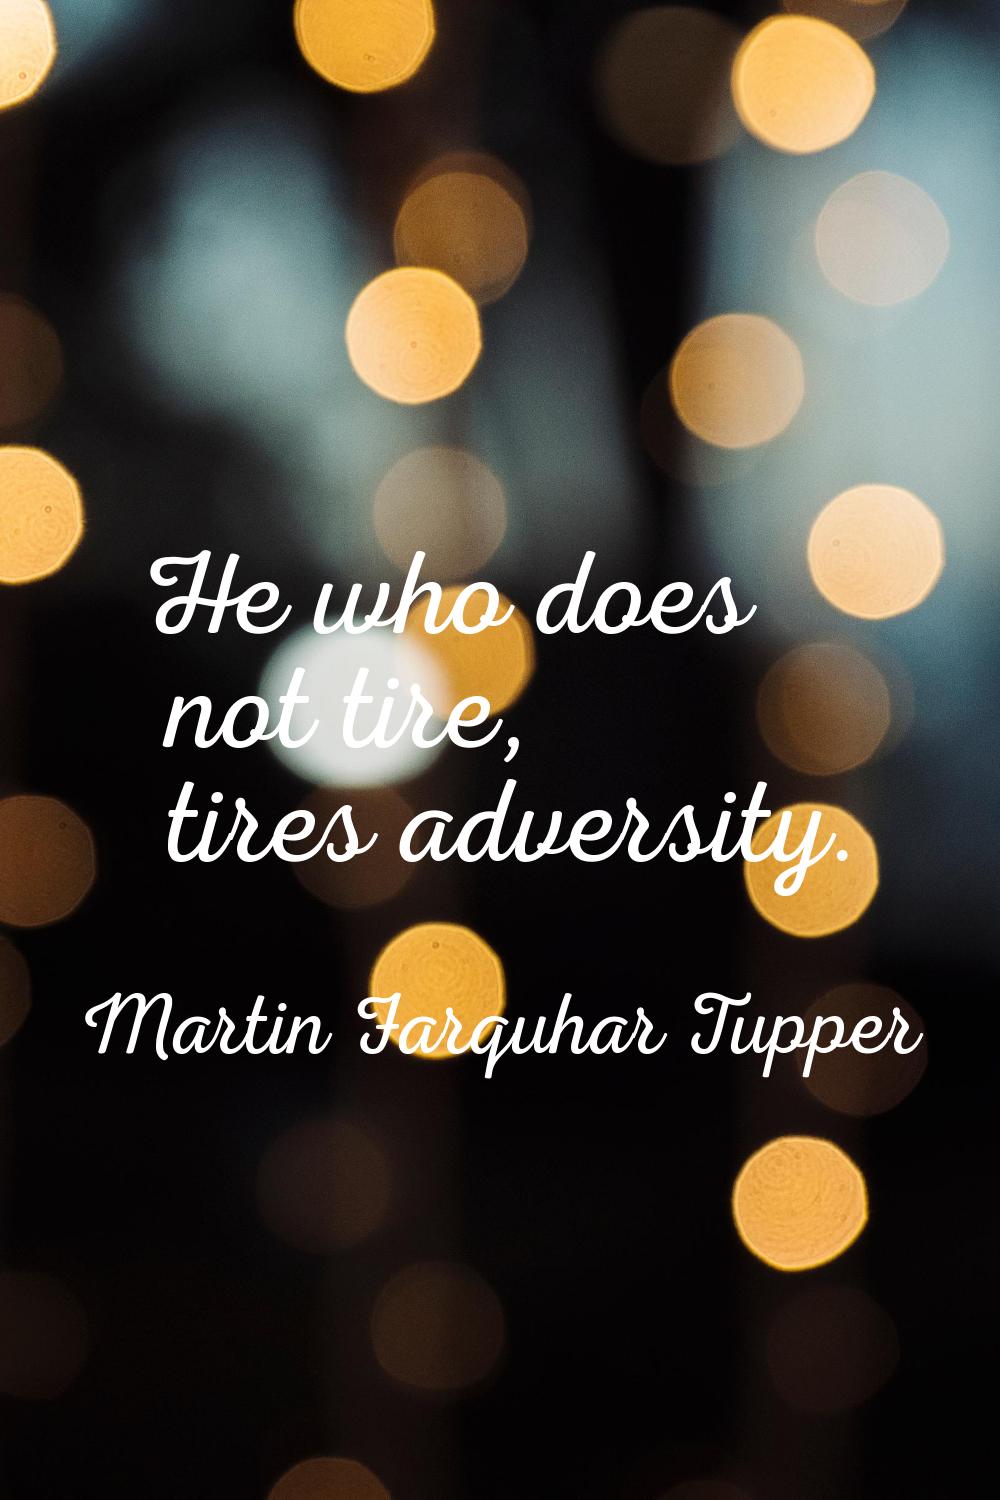 He who does not tire, tires adversity.